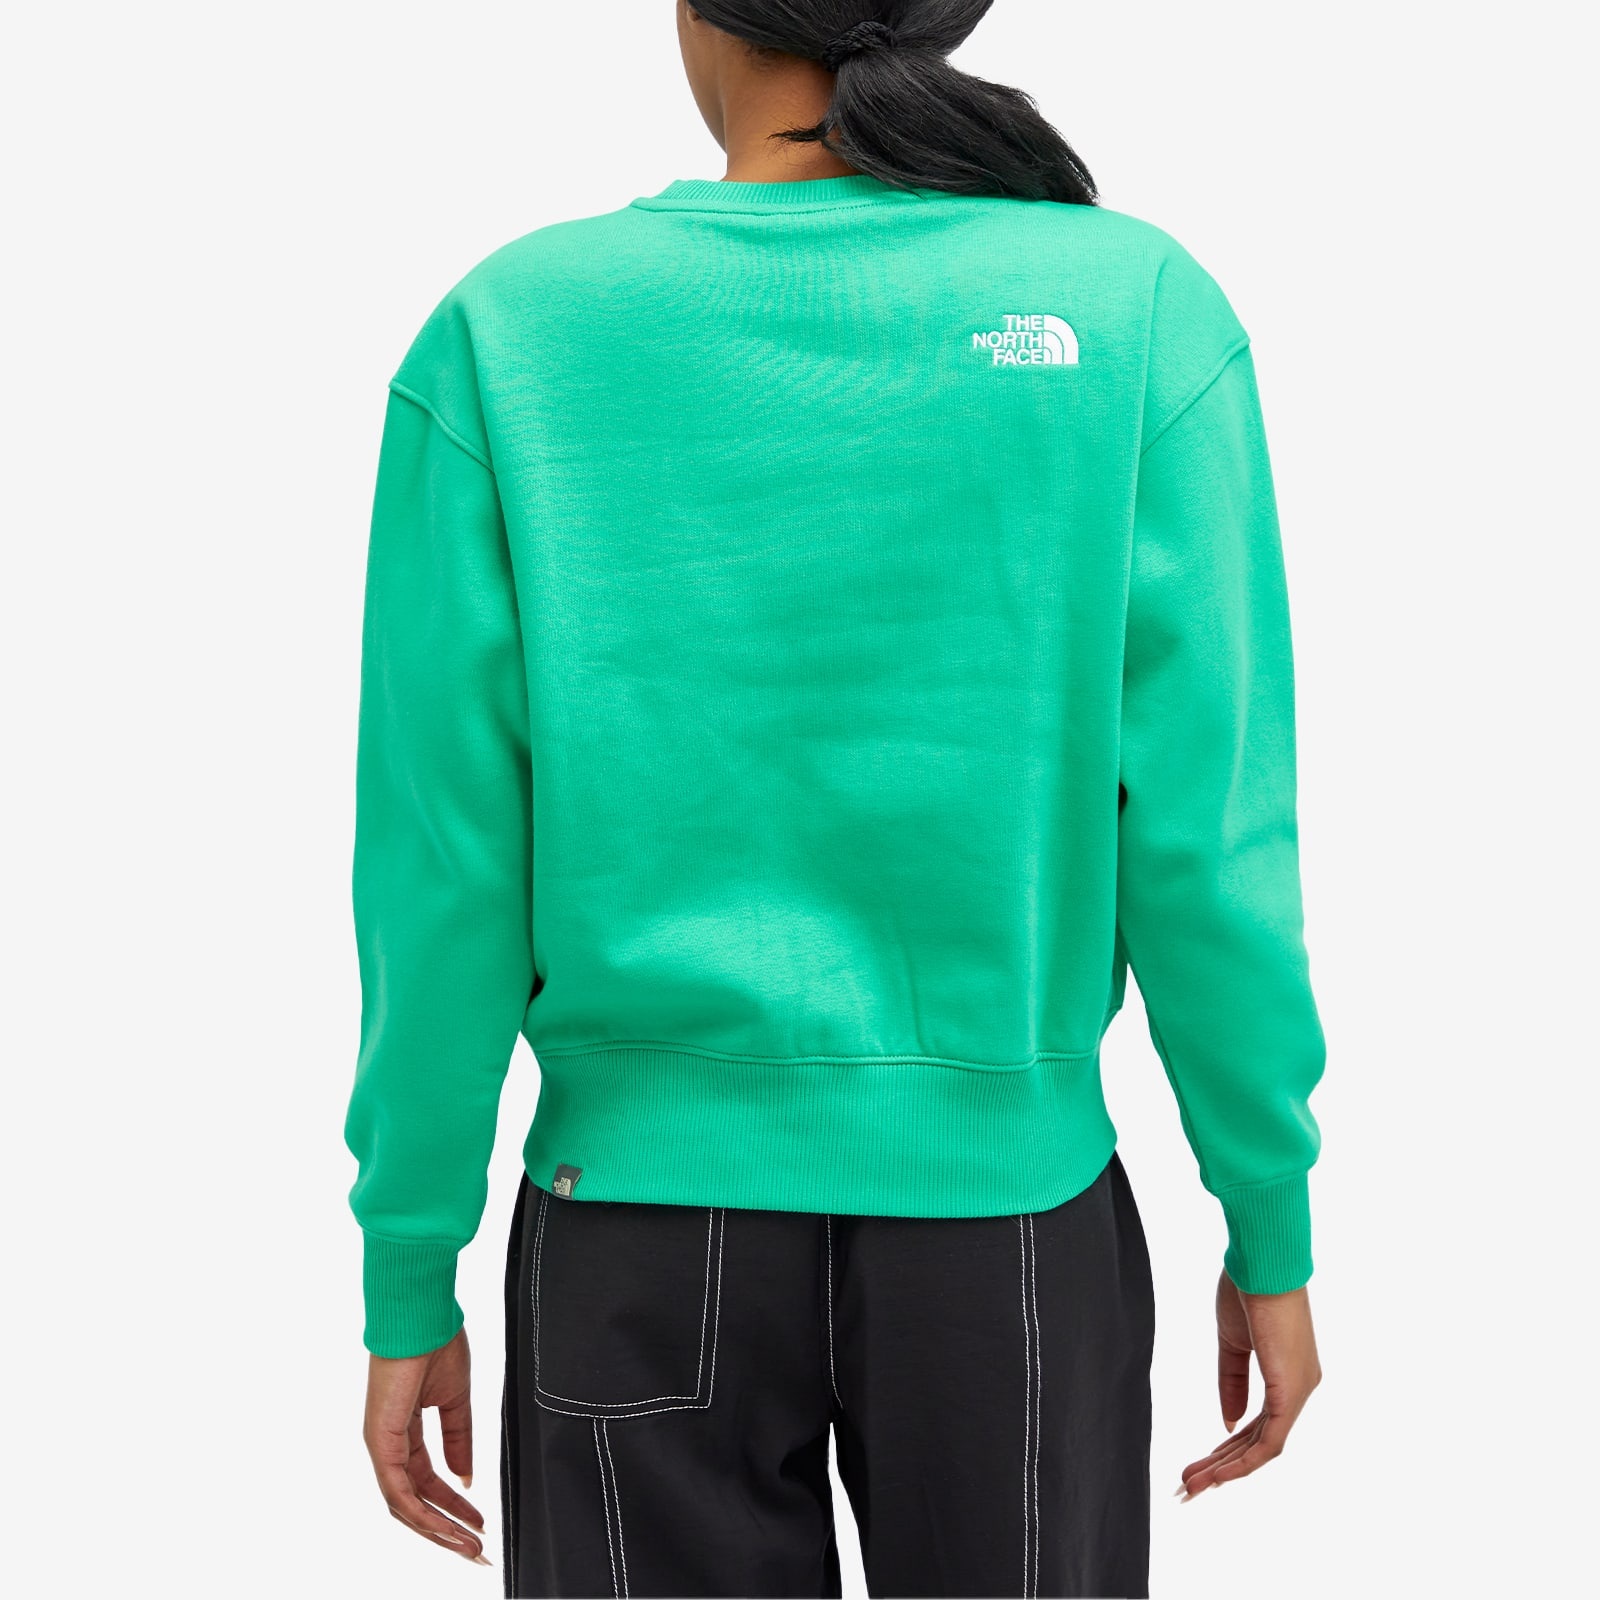 The North Face Essential Crew Sweat - 3